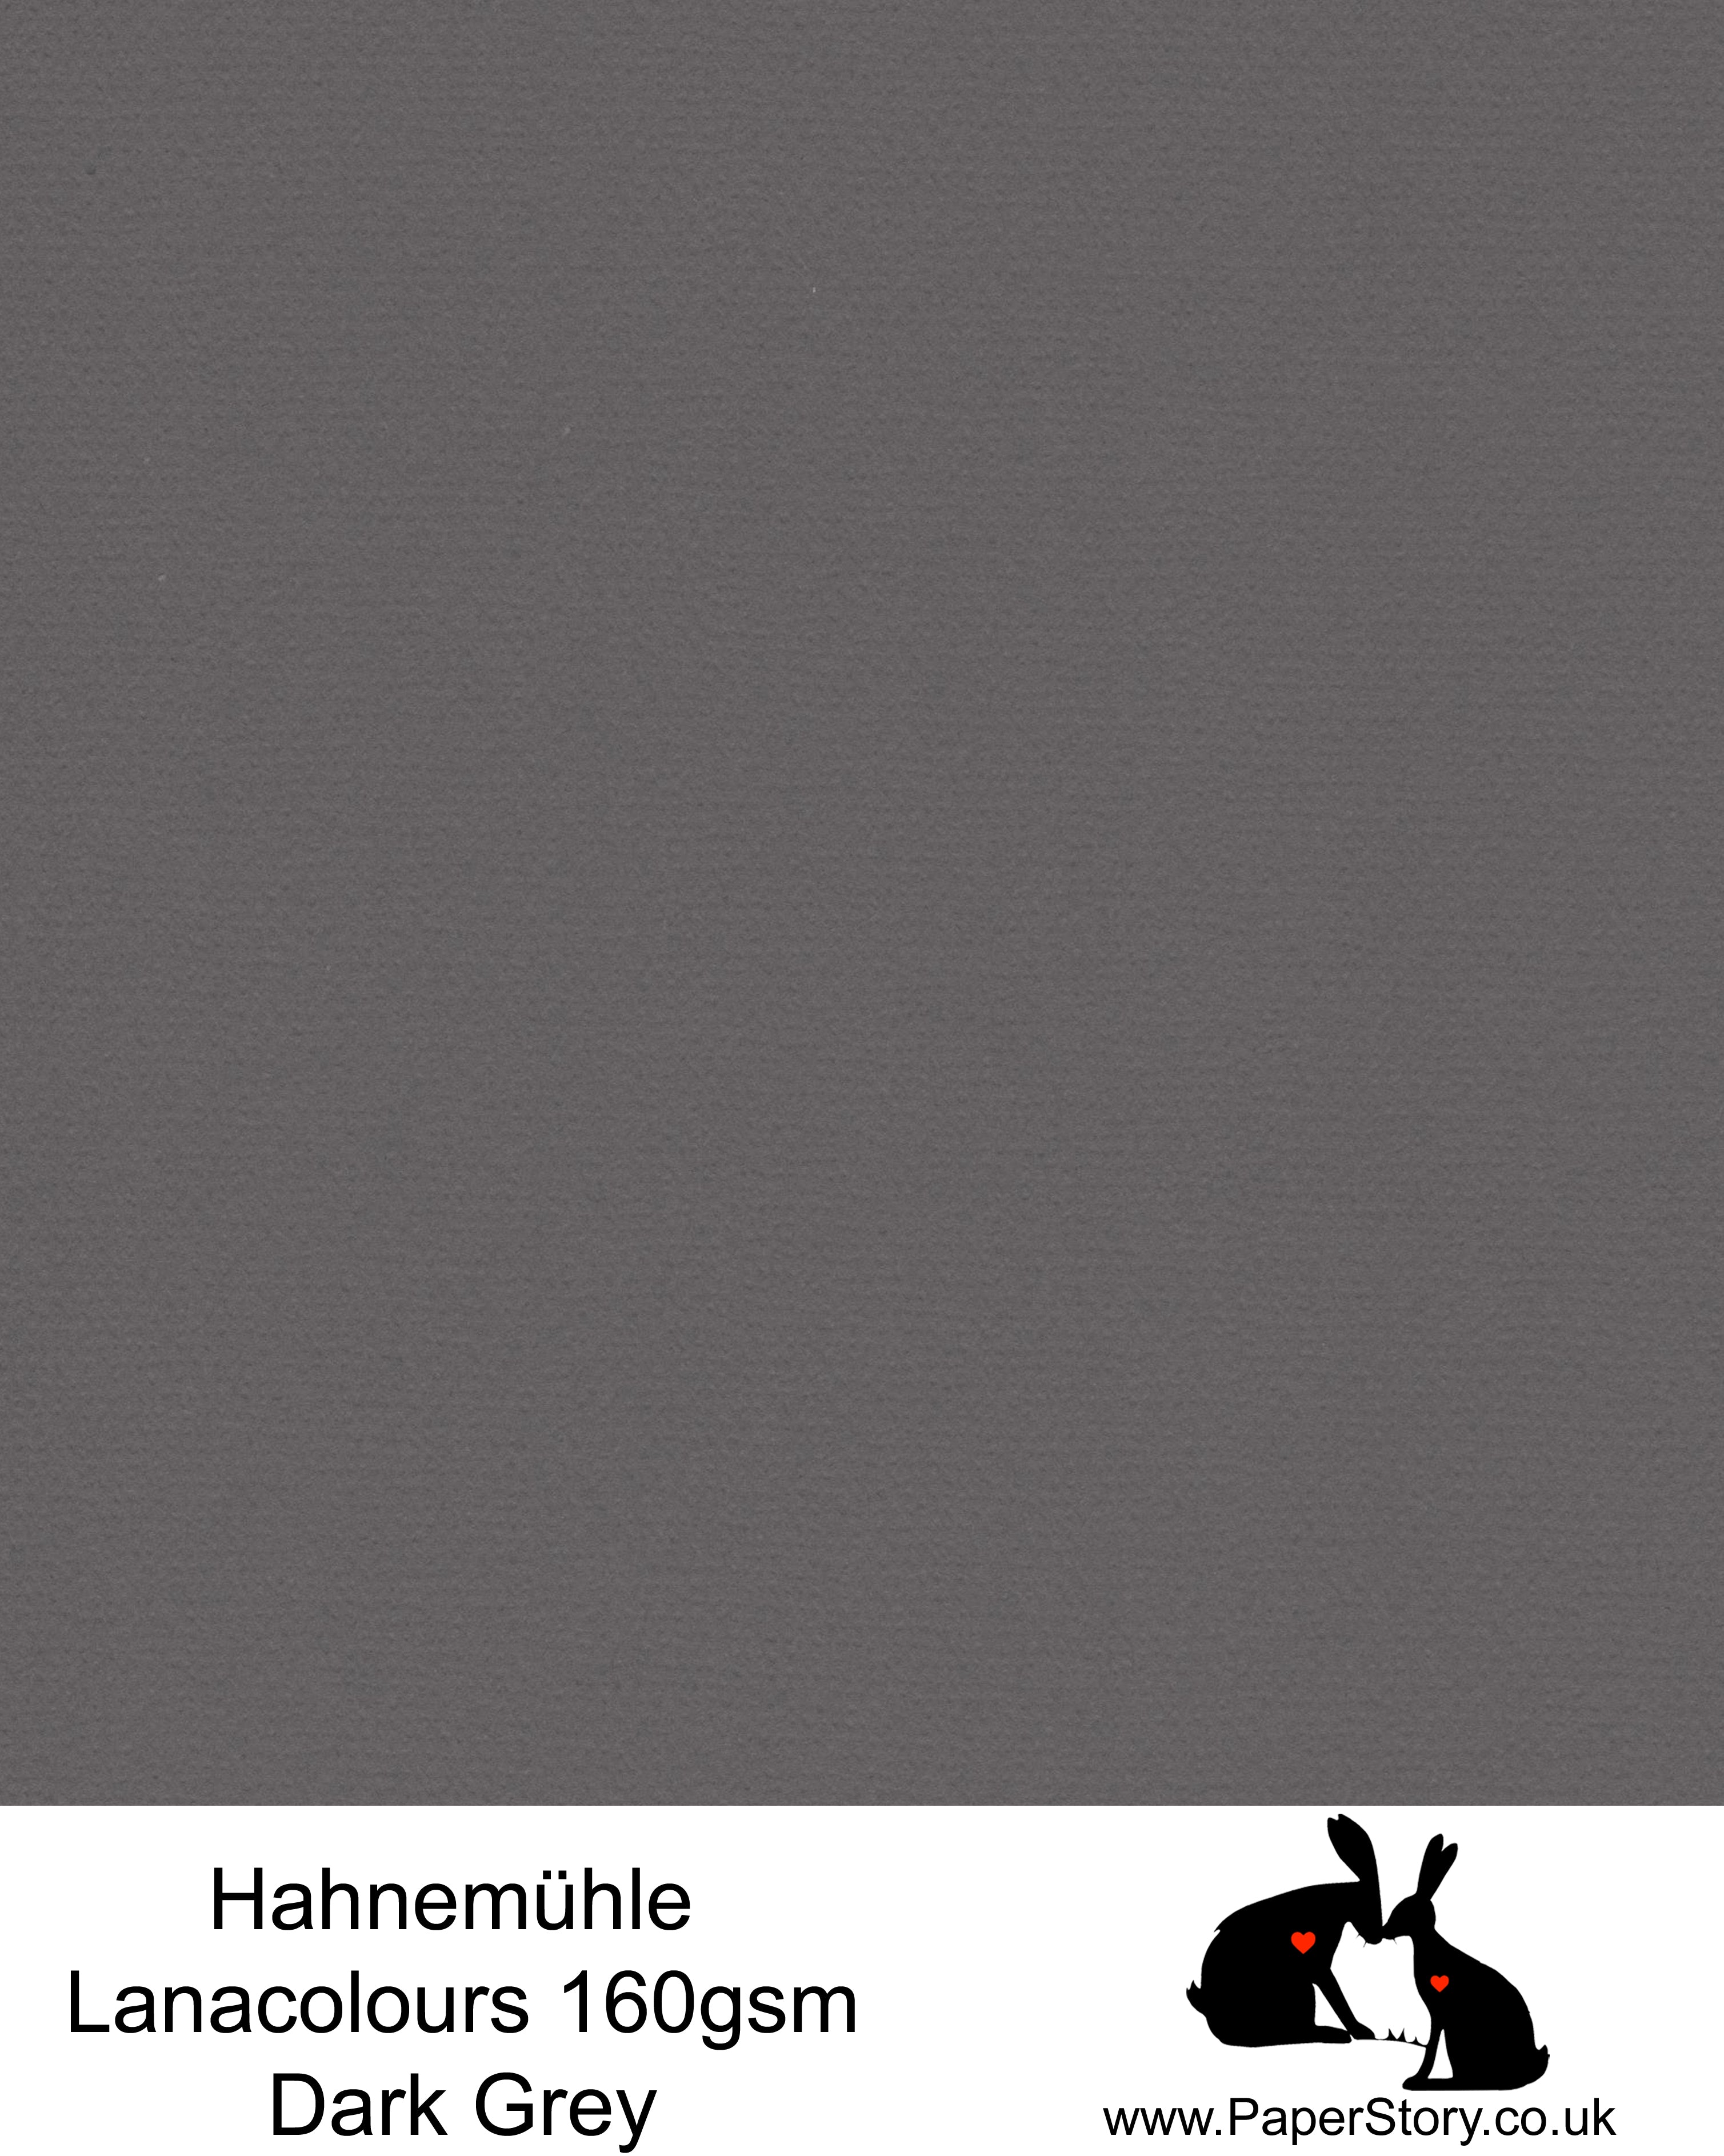 Hahnemühle Lana Colours pastel dark grey hammered paper 160 gsm. Artist Premium Pastel and Papercutting Papers 160 gsm often described as hammered paper.